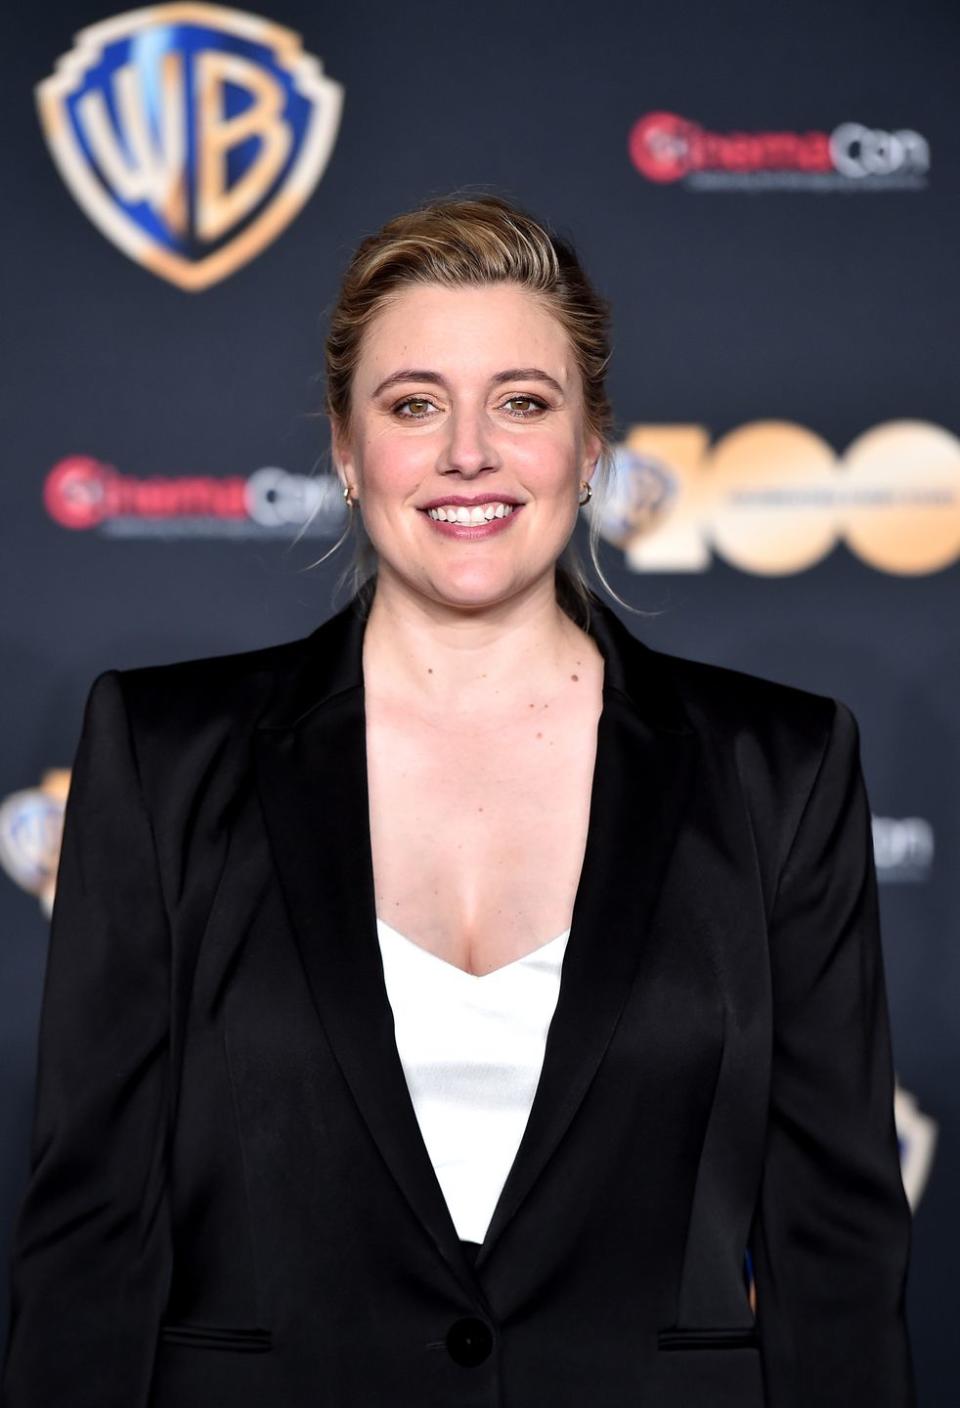 greta gerwig smiles at the camera, she wears a black suit jacket and white top and stands in front of a blurry black background with logos